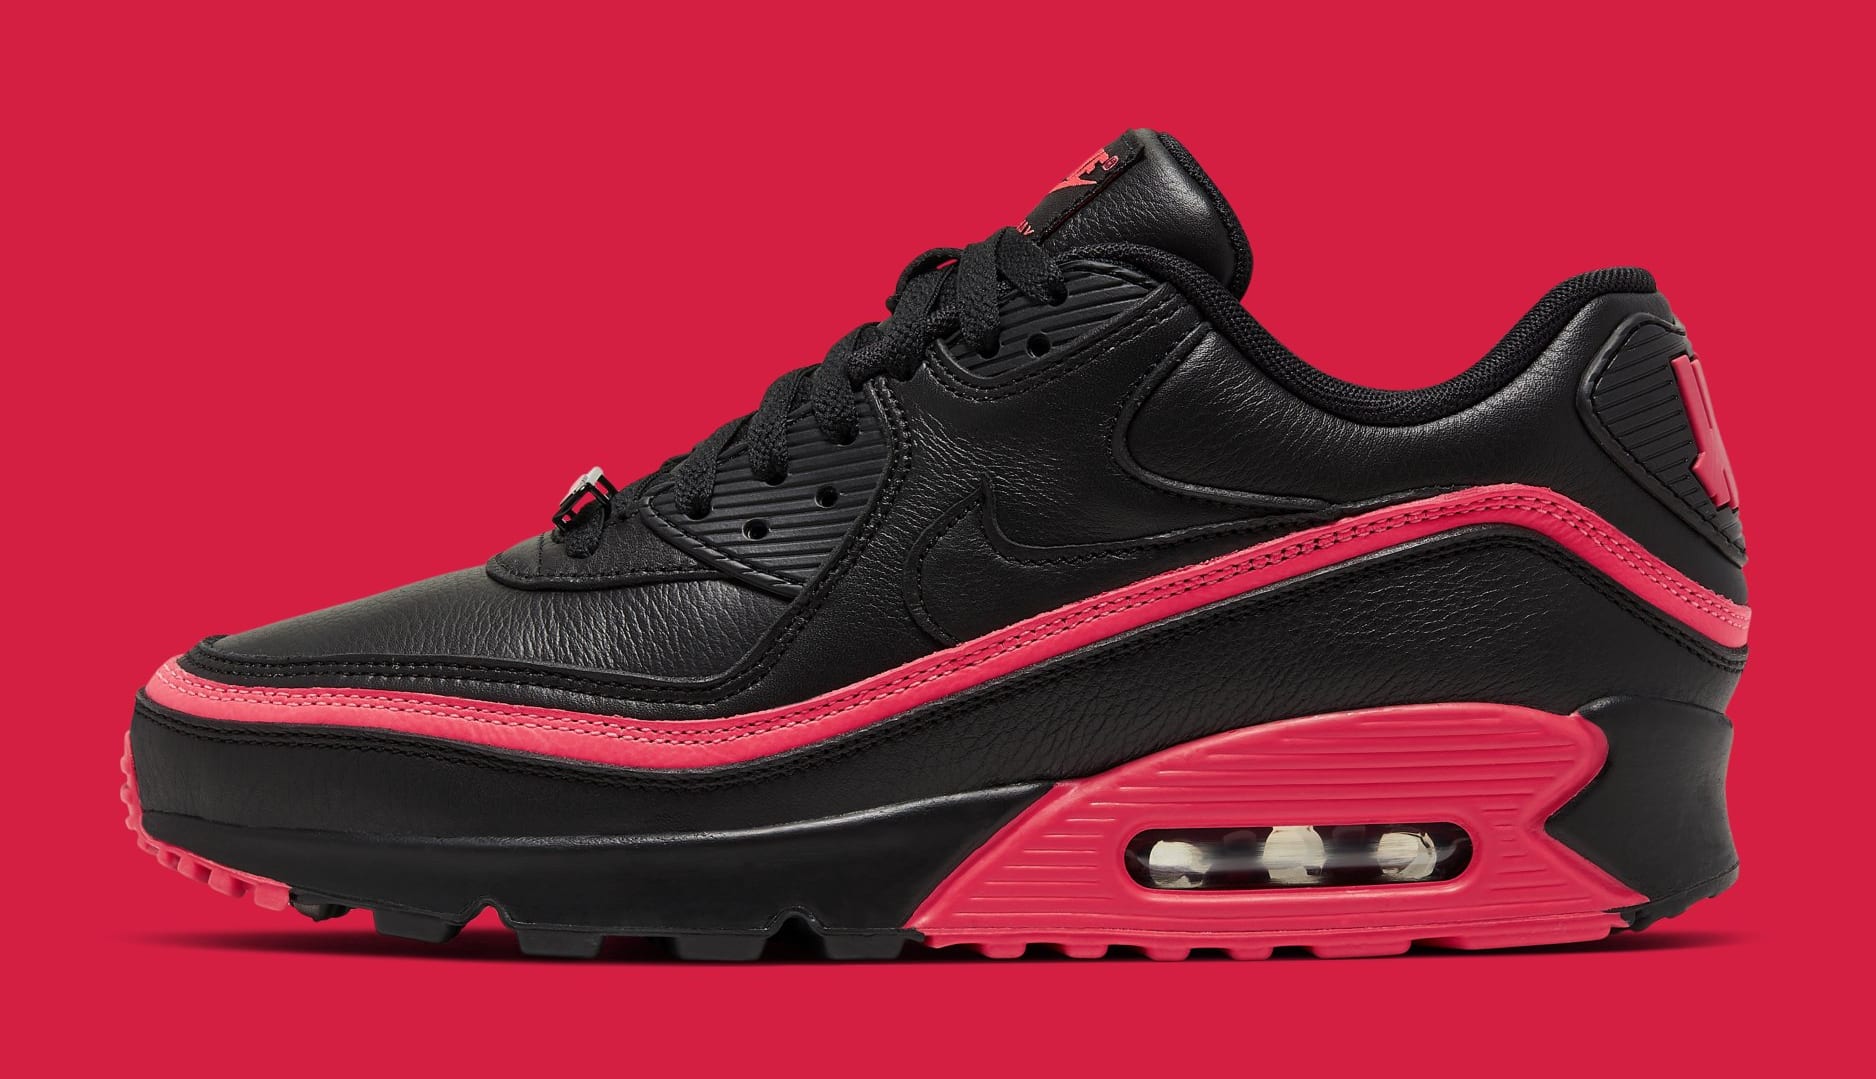 undefeated-nike-air-max-90-black-solar-red-cj7197-003-lateral